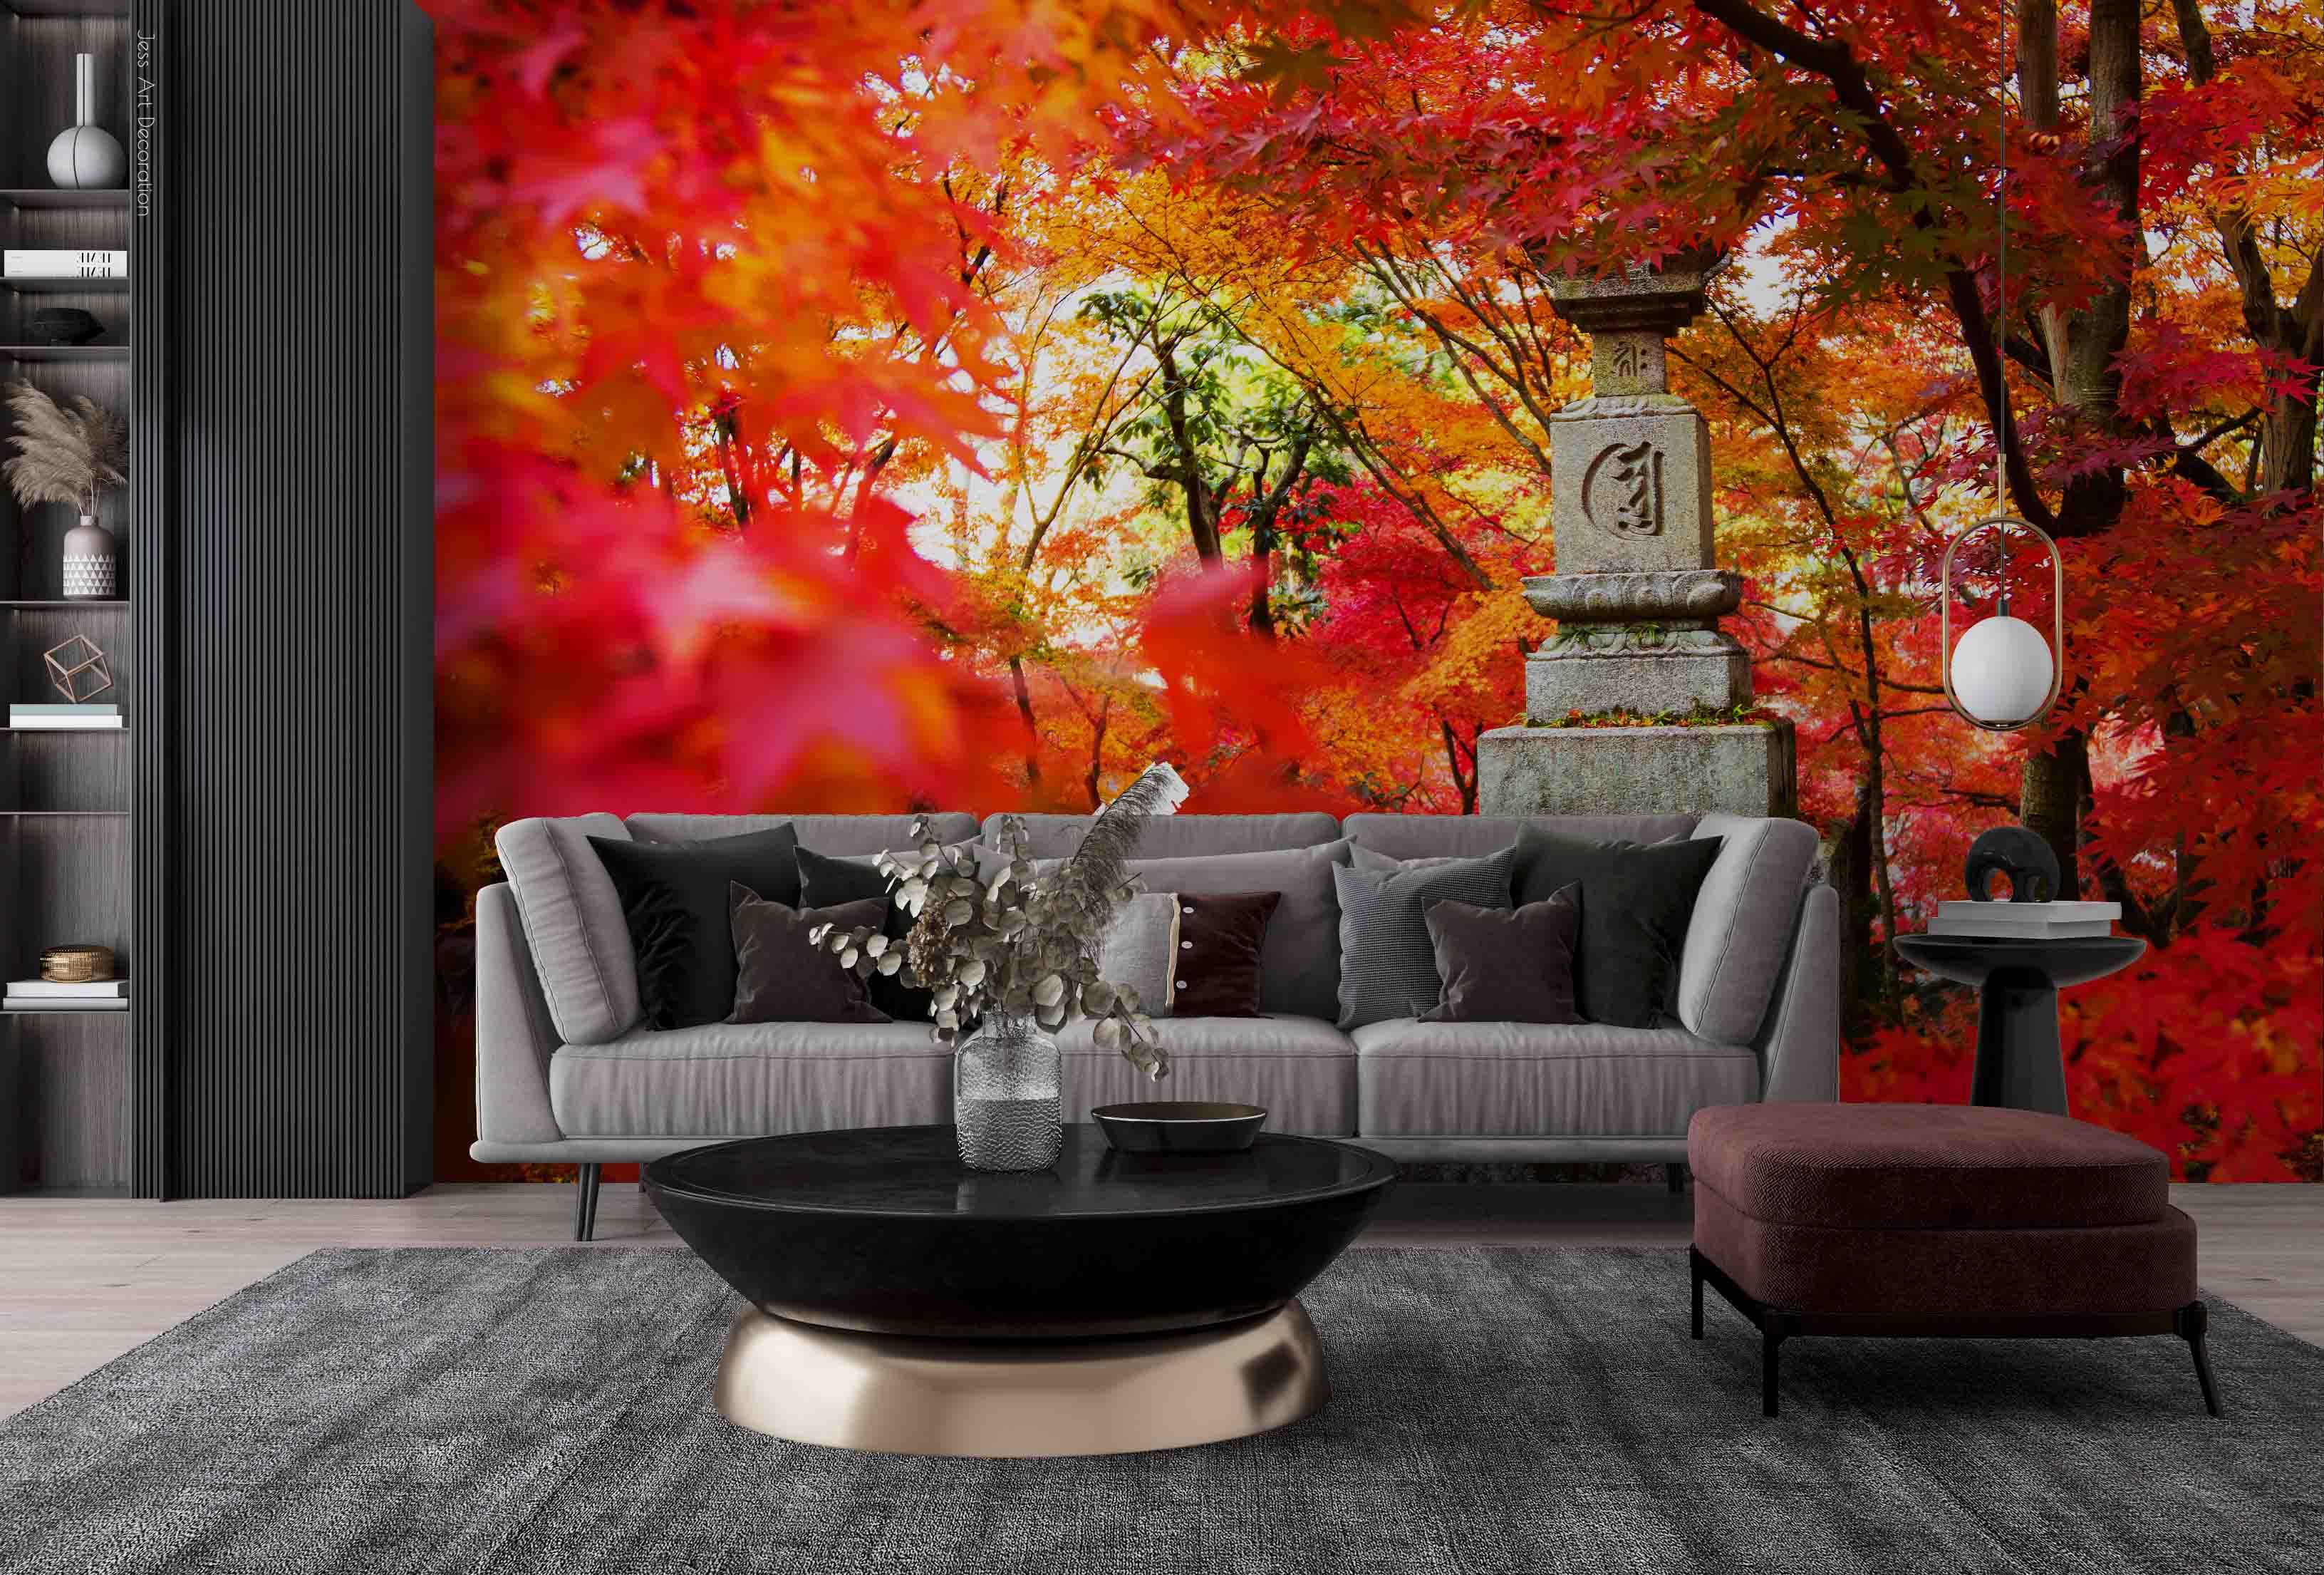 3D Natural Scenery Red Maple Leaf Stone Tablet Wall Mural Wallpaper GD 2269- Jess Art Decoration